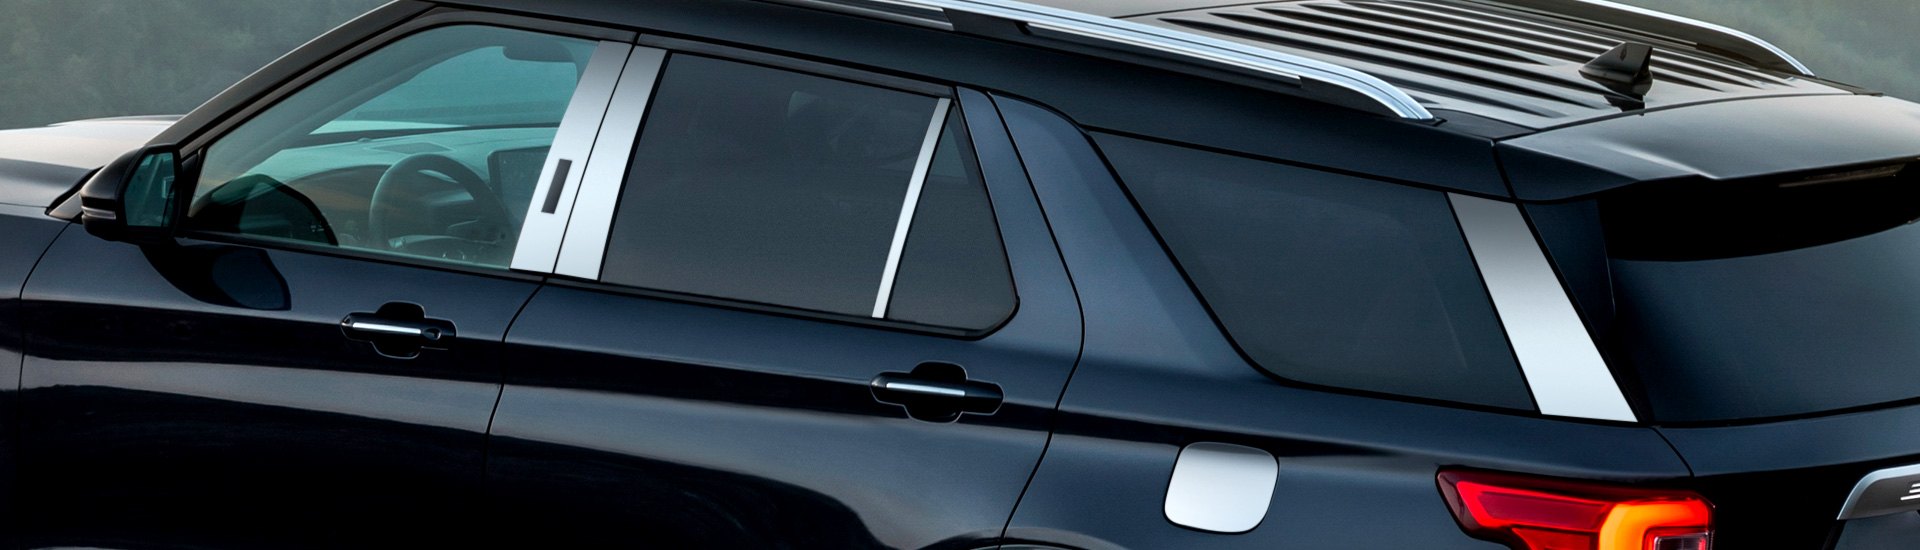 Jazz Up The Look Of Your 2020 Ford Explorer With All-New SAA Chrome Trim